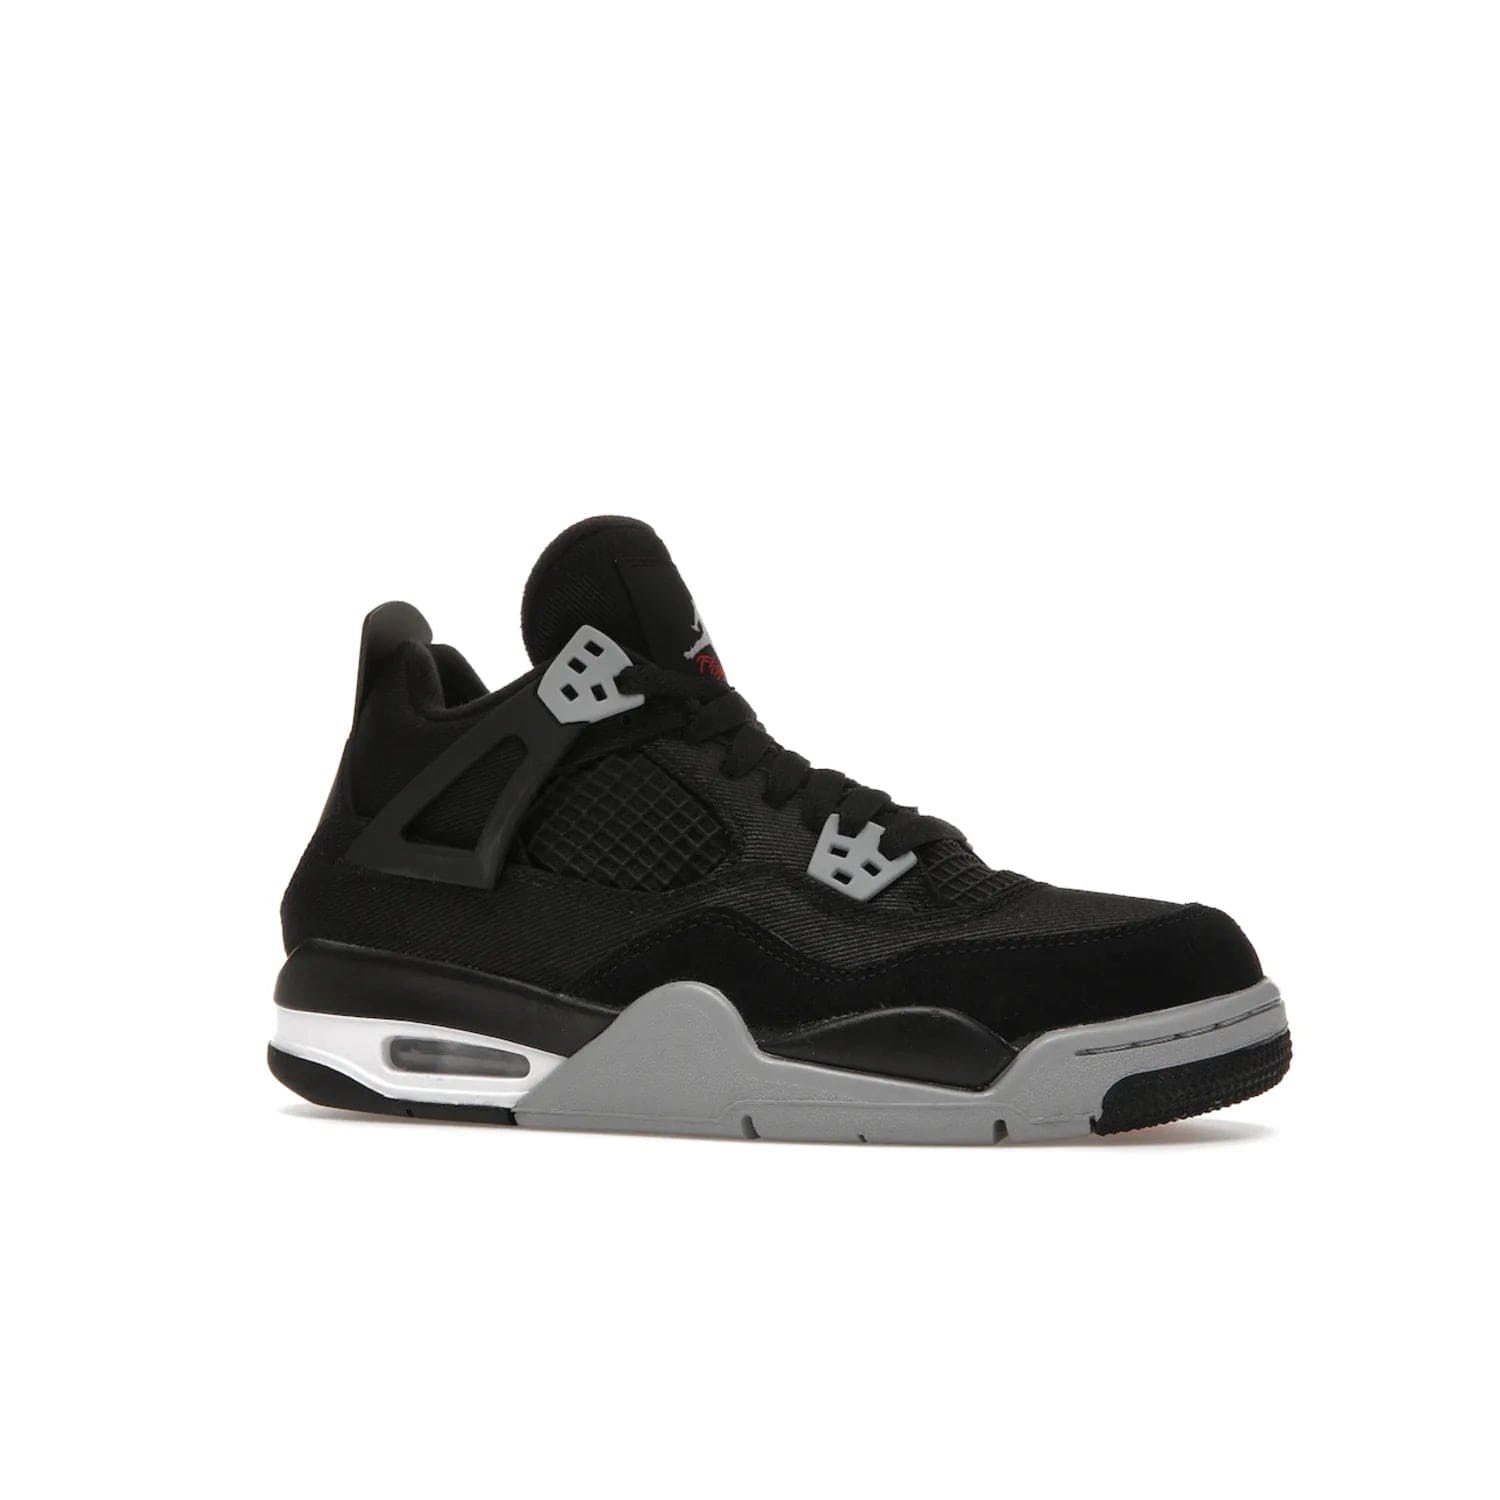 Jordan 4 Retro Black Canvas (GS) - Image 3 - Only at www.BallersClubKickz.com - Premium Air Jordan 4 Retro Black Canvas in grade-schooler's catalog. Featuring black suede canvas upper, grey molding, accents in red, white midsole, woven Jumpman tag, & visible AIR cushioning. Releasing Oct. 1, 2022.